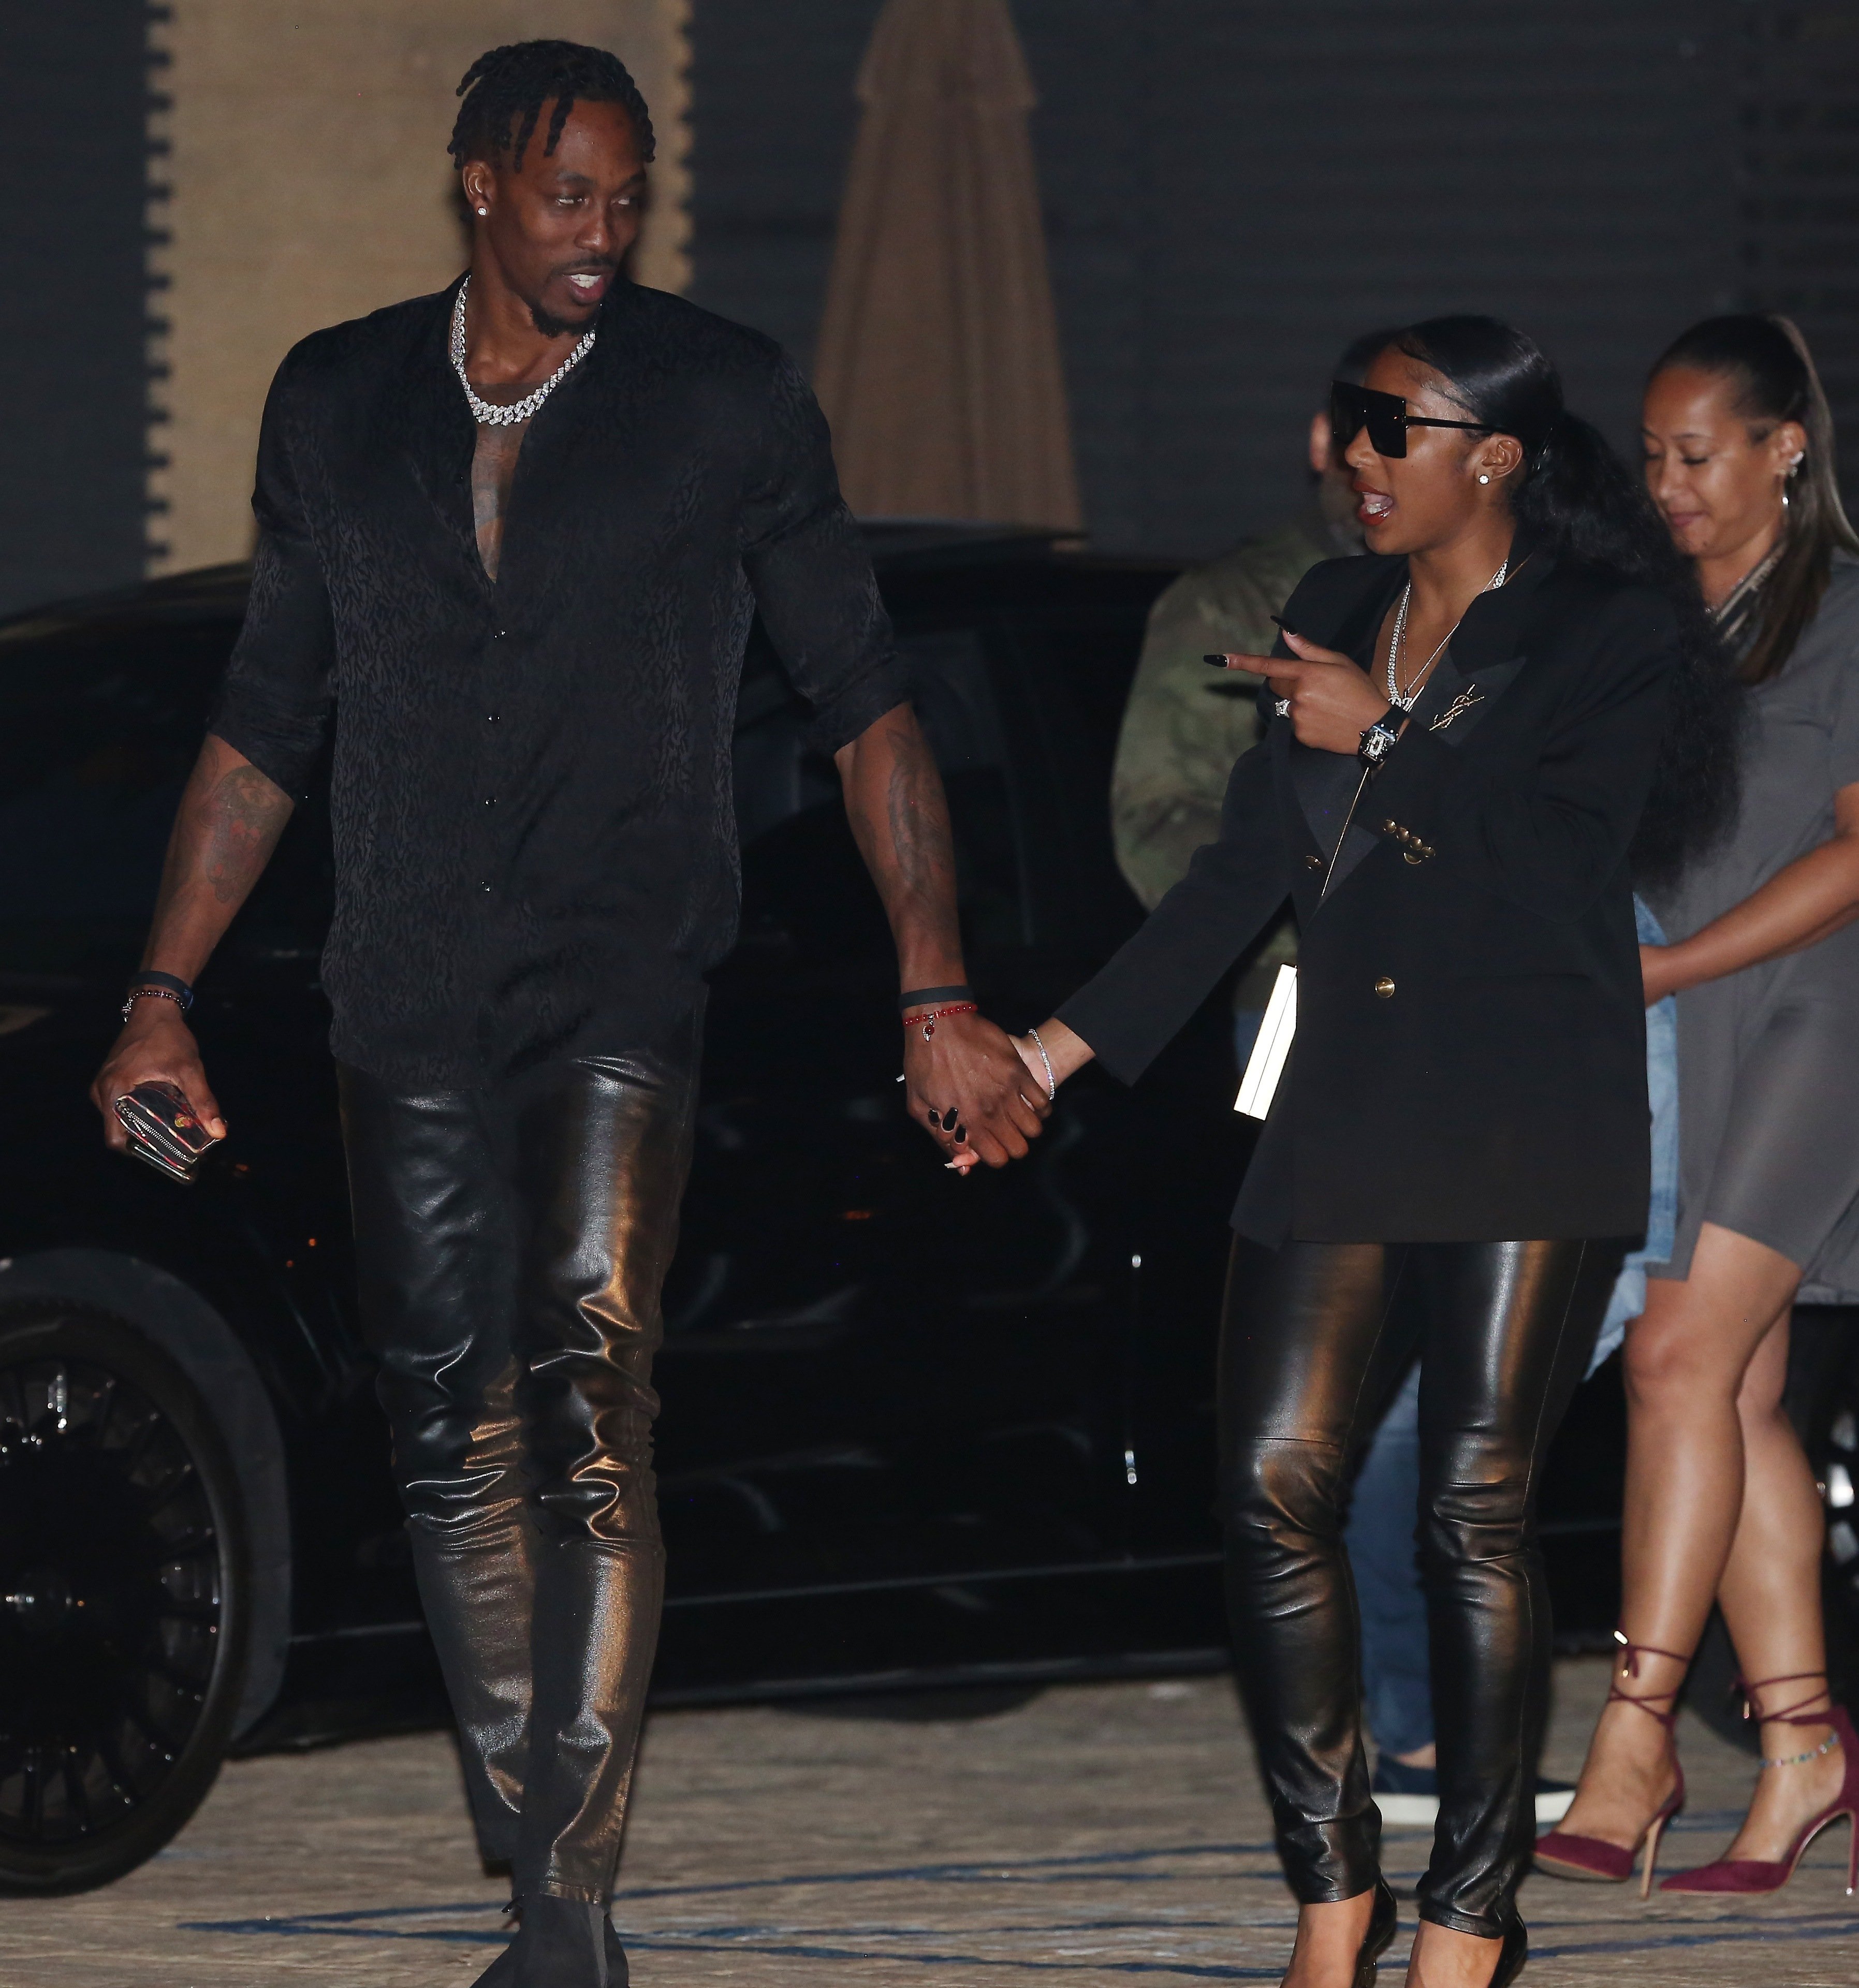 Dwight Howard and Te'a Cooper outside Nobu, on October 14, 2020, in Malibu, California. | Source: Getty Images